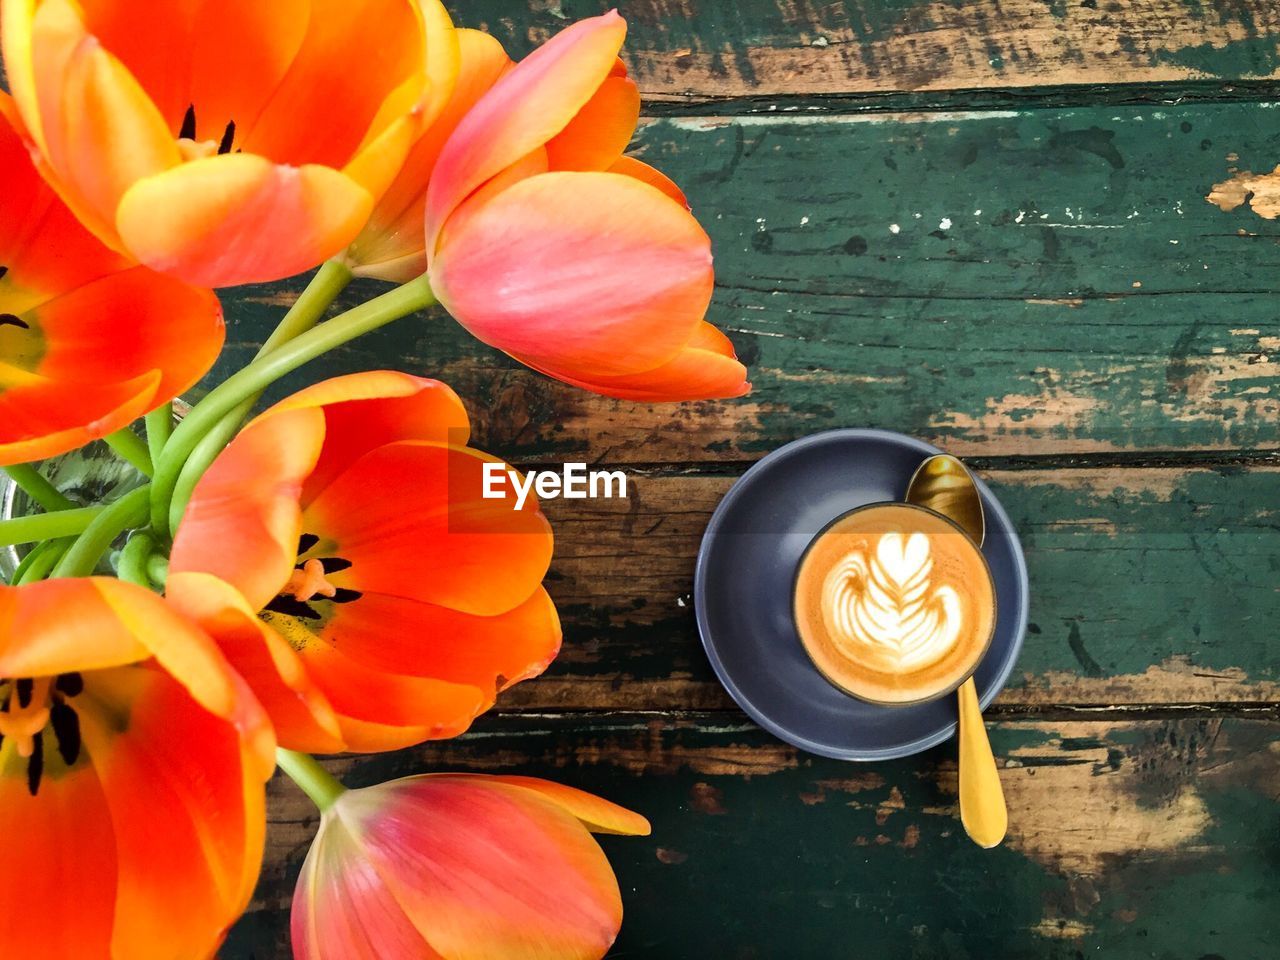 Close-up of orange tulip flowers and coffee cup